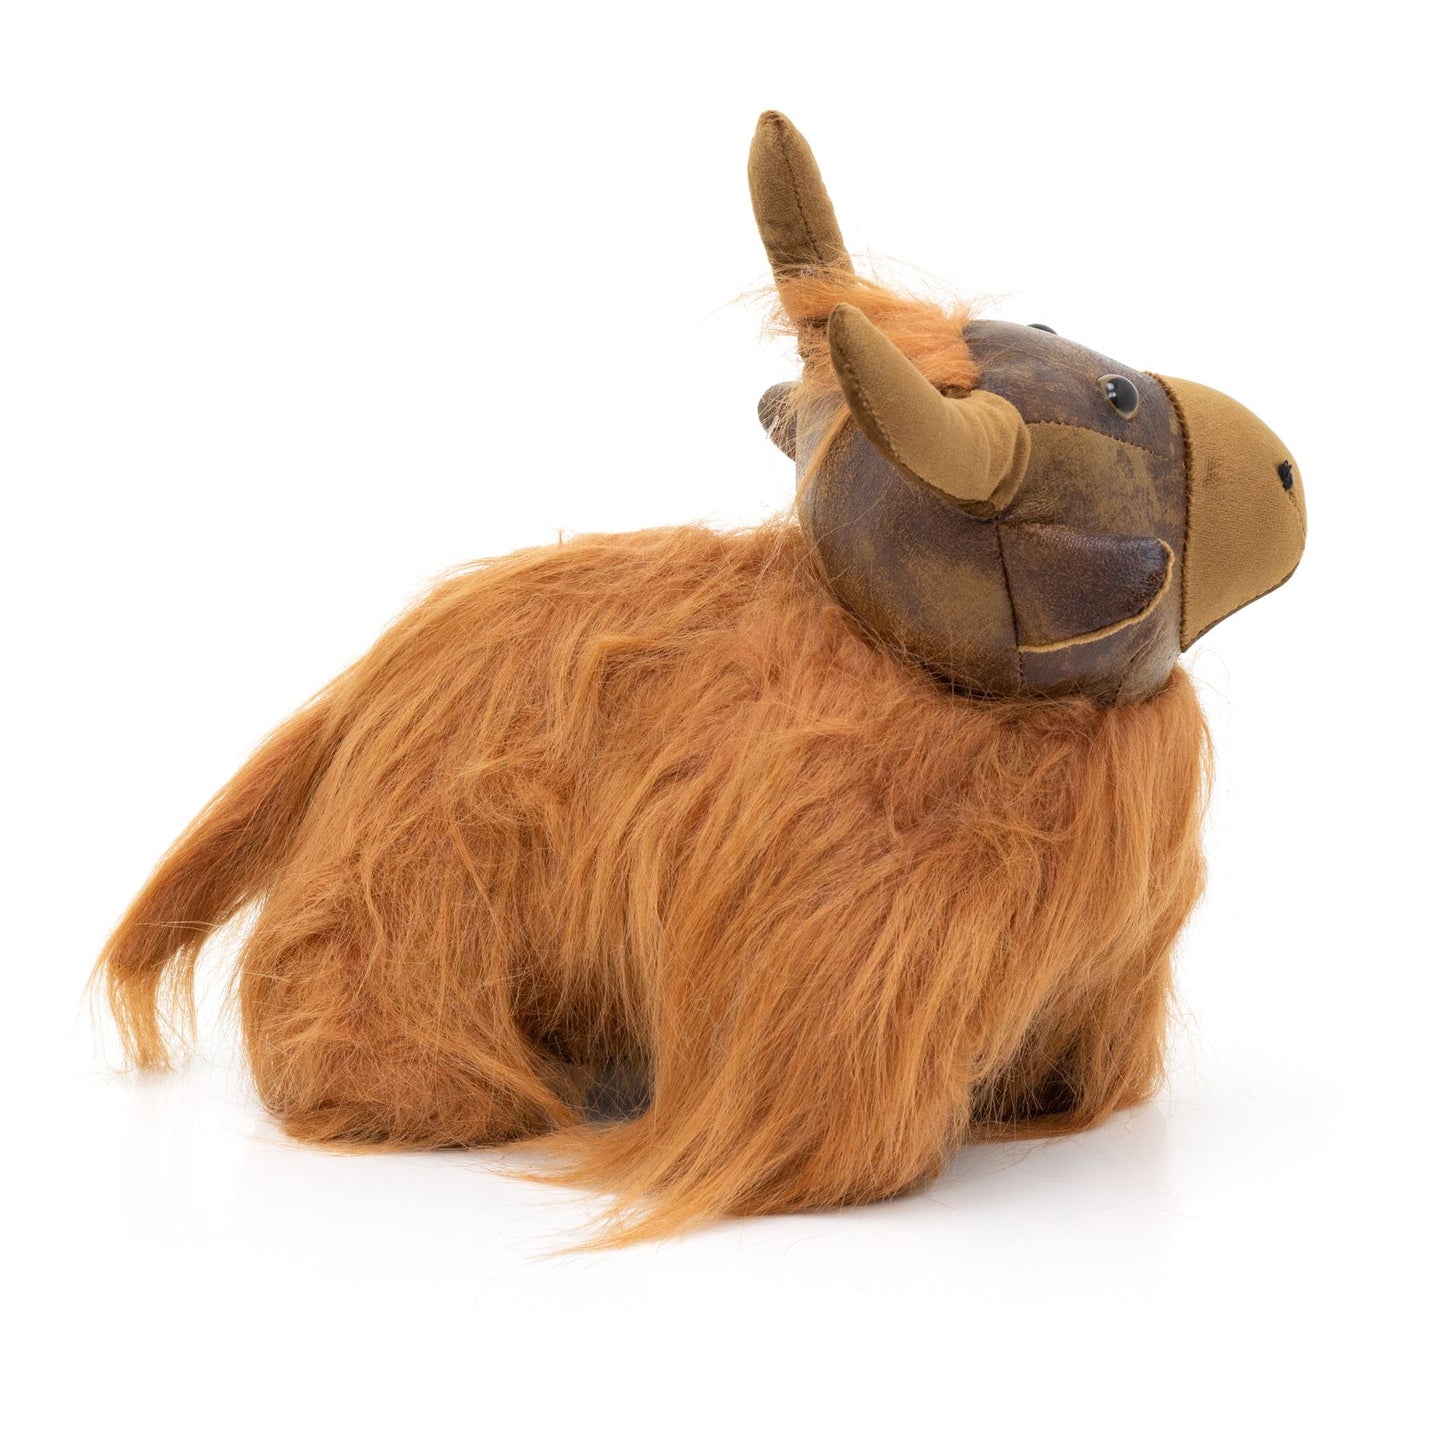 Angus Highland Cow Doorstop | Faux Leather Weighted Cow Animal Door Stop 1.8kg